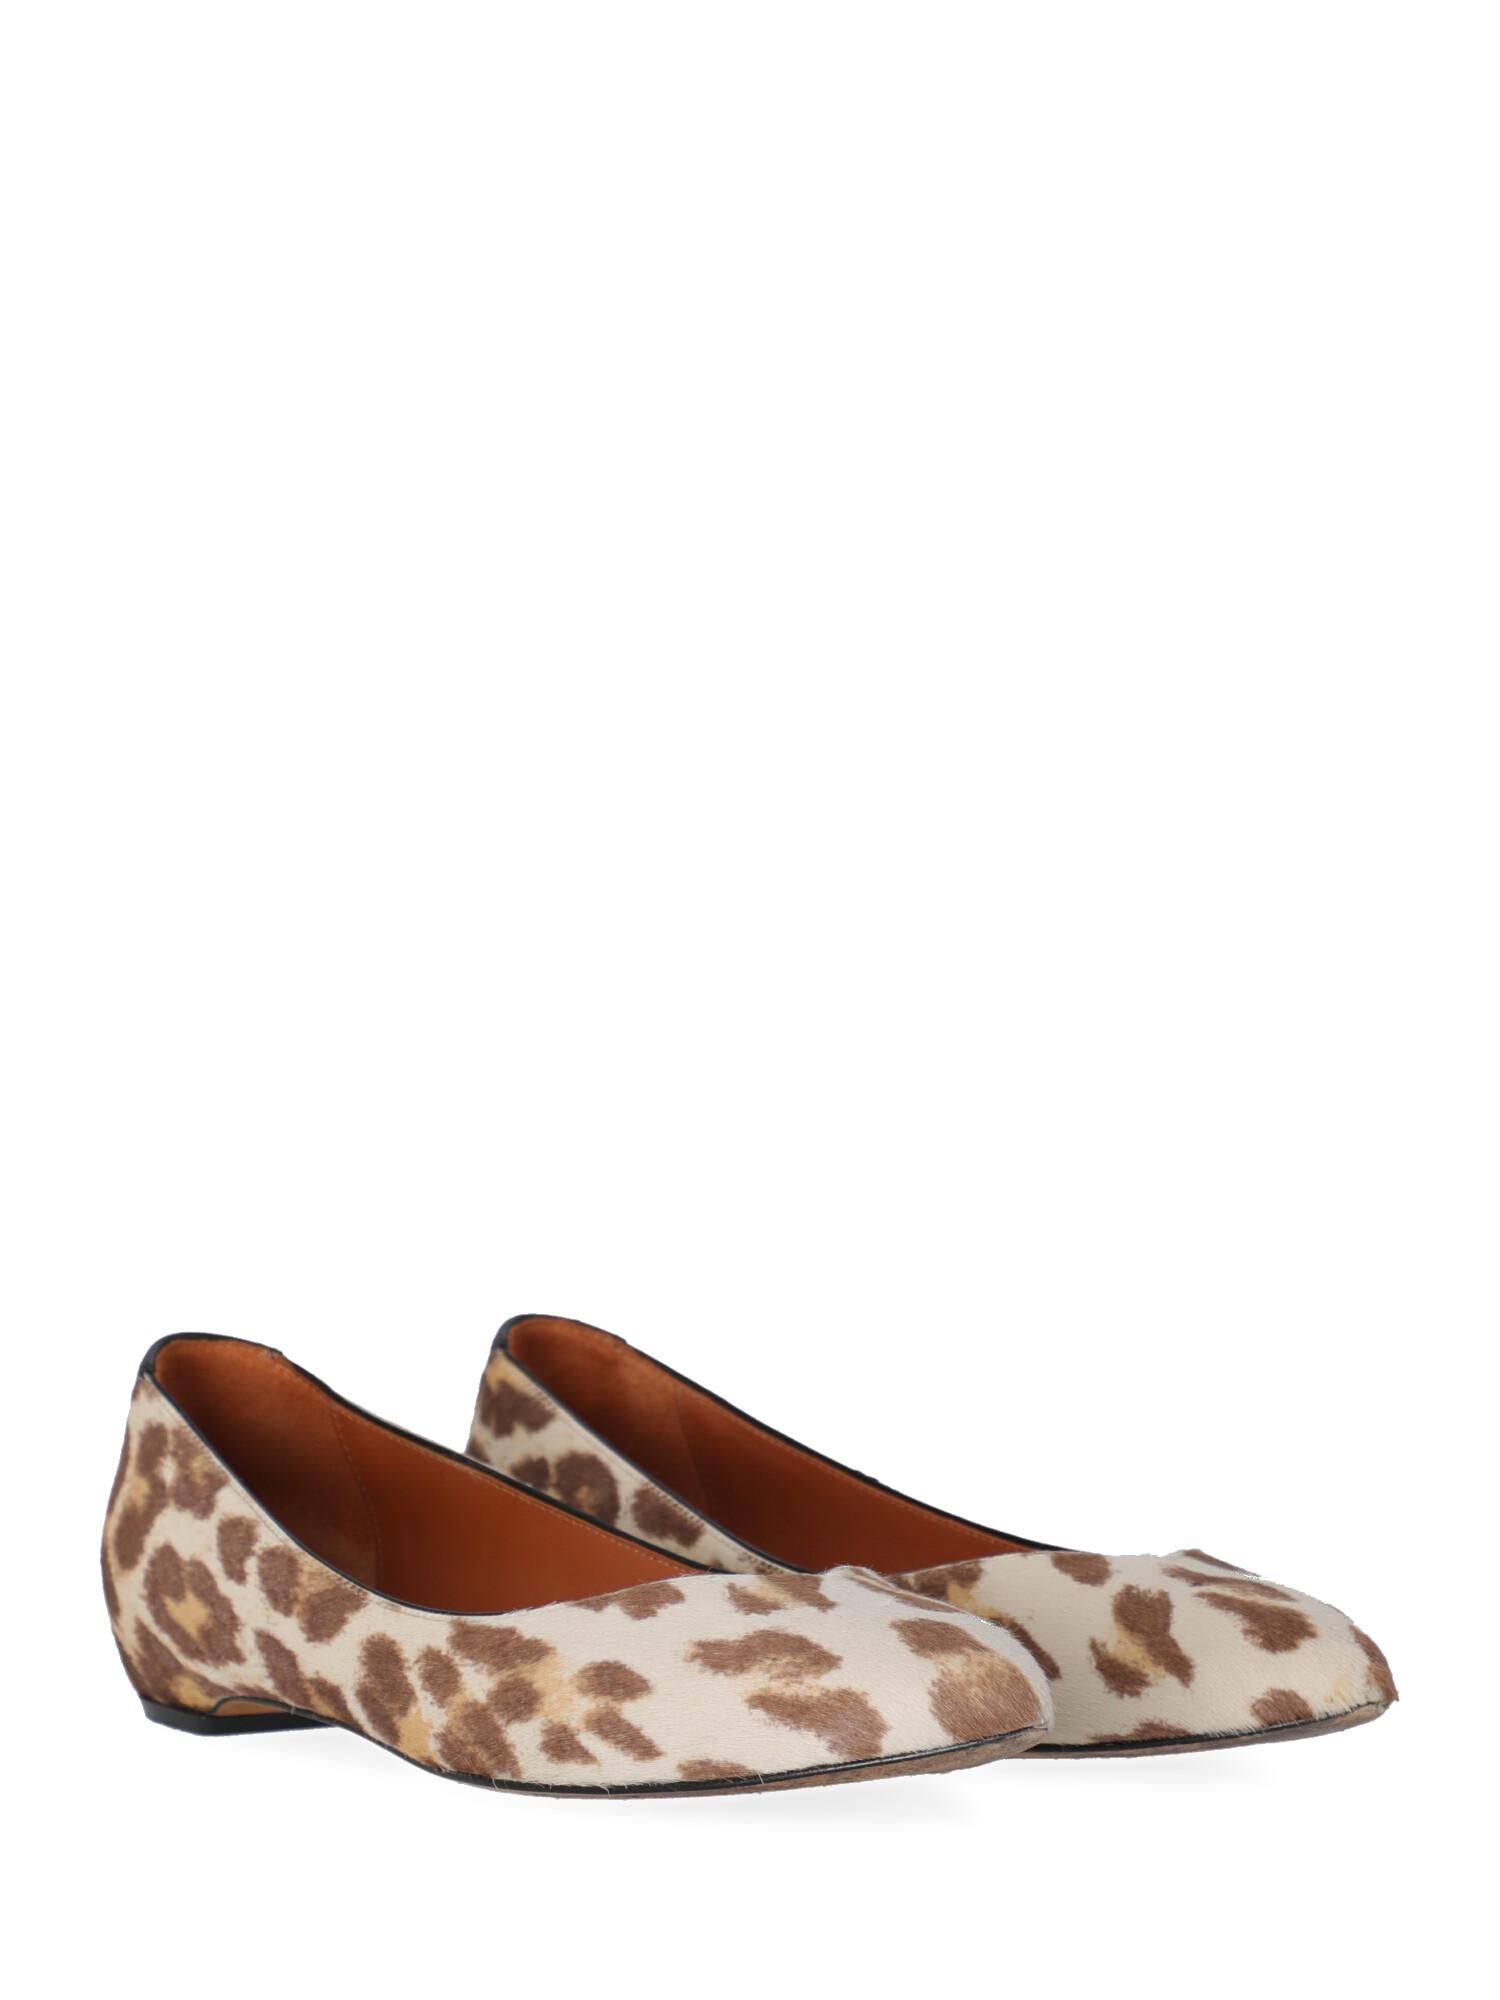 Shoe, leather, animal print, pony, pointed toe, branded insole

Includes:
- Dust bag
- Box
- Product care

Product Condition: Very Good
Sole: visible signs of use. Upper: negligible scratches. Insole: negligible generic residues.

Measurements: